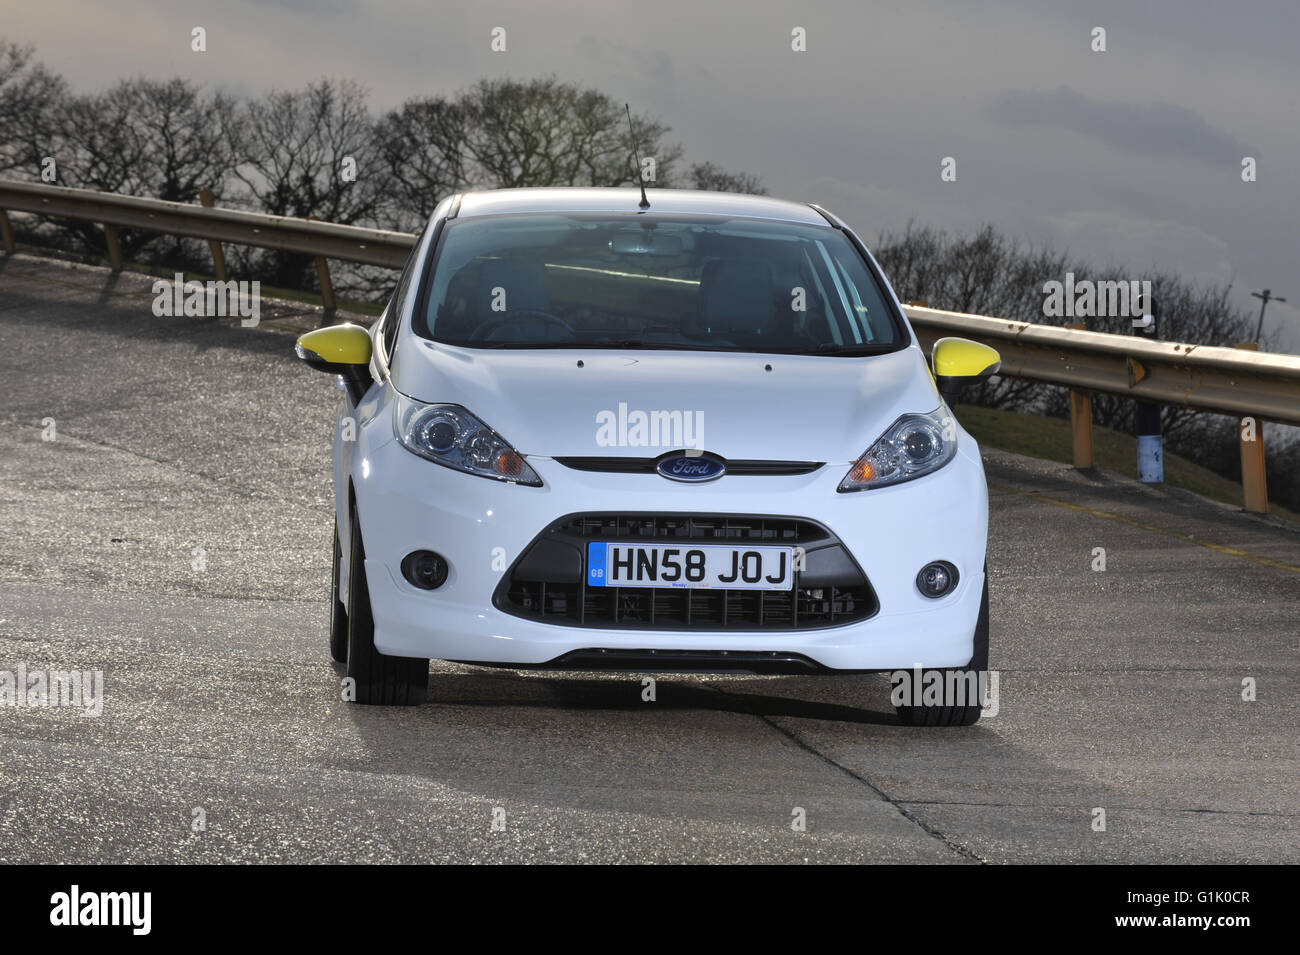 2009 Mountune tuned Ford Fiesta ST performance car Stock Photo - Alamy